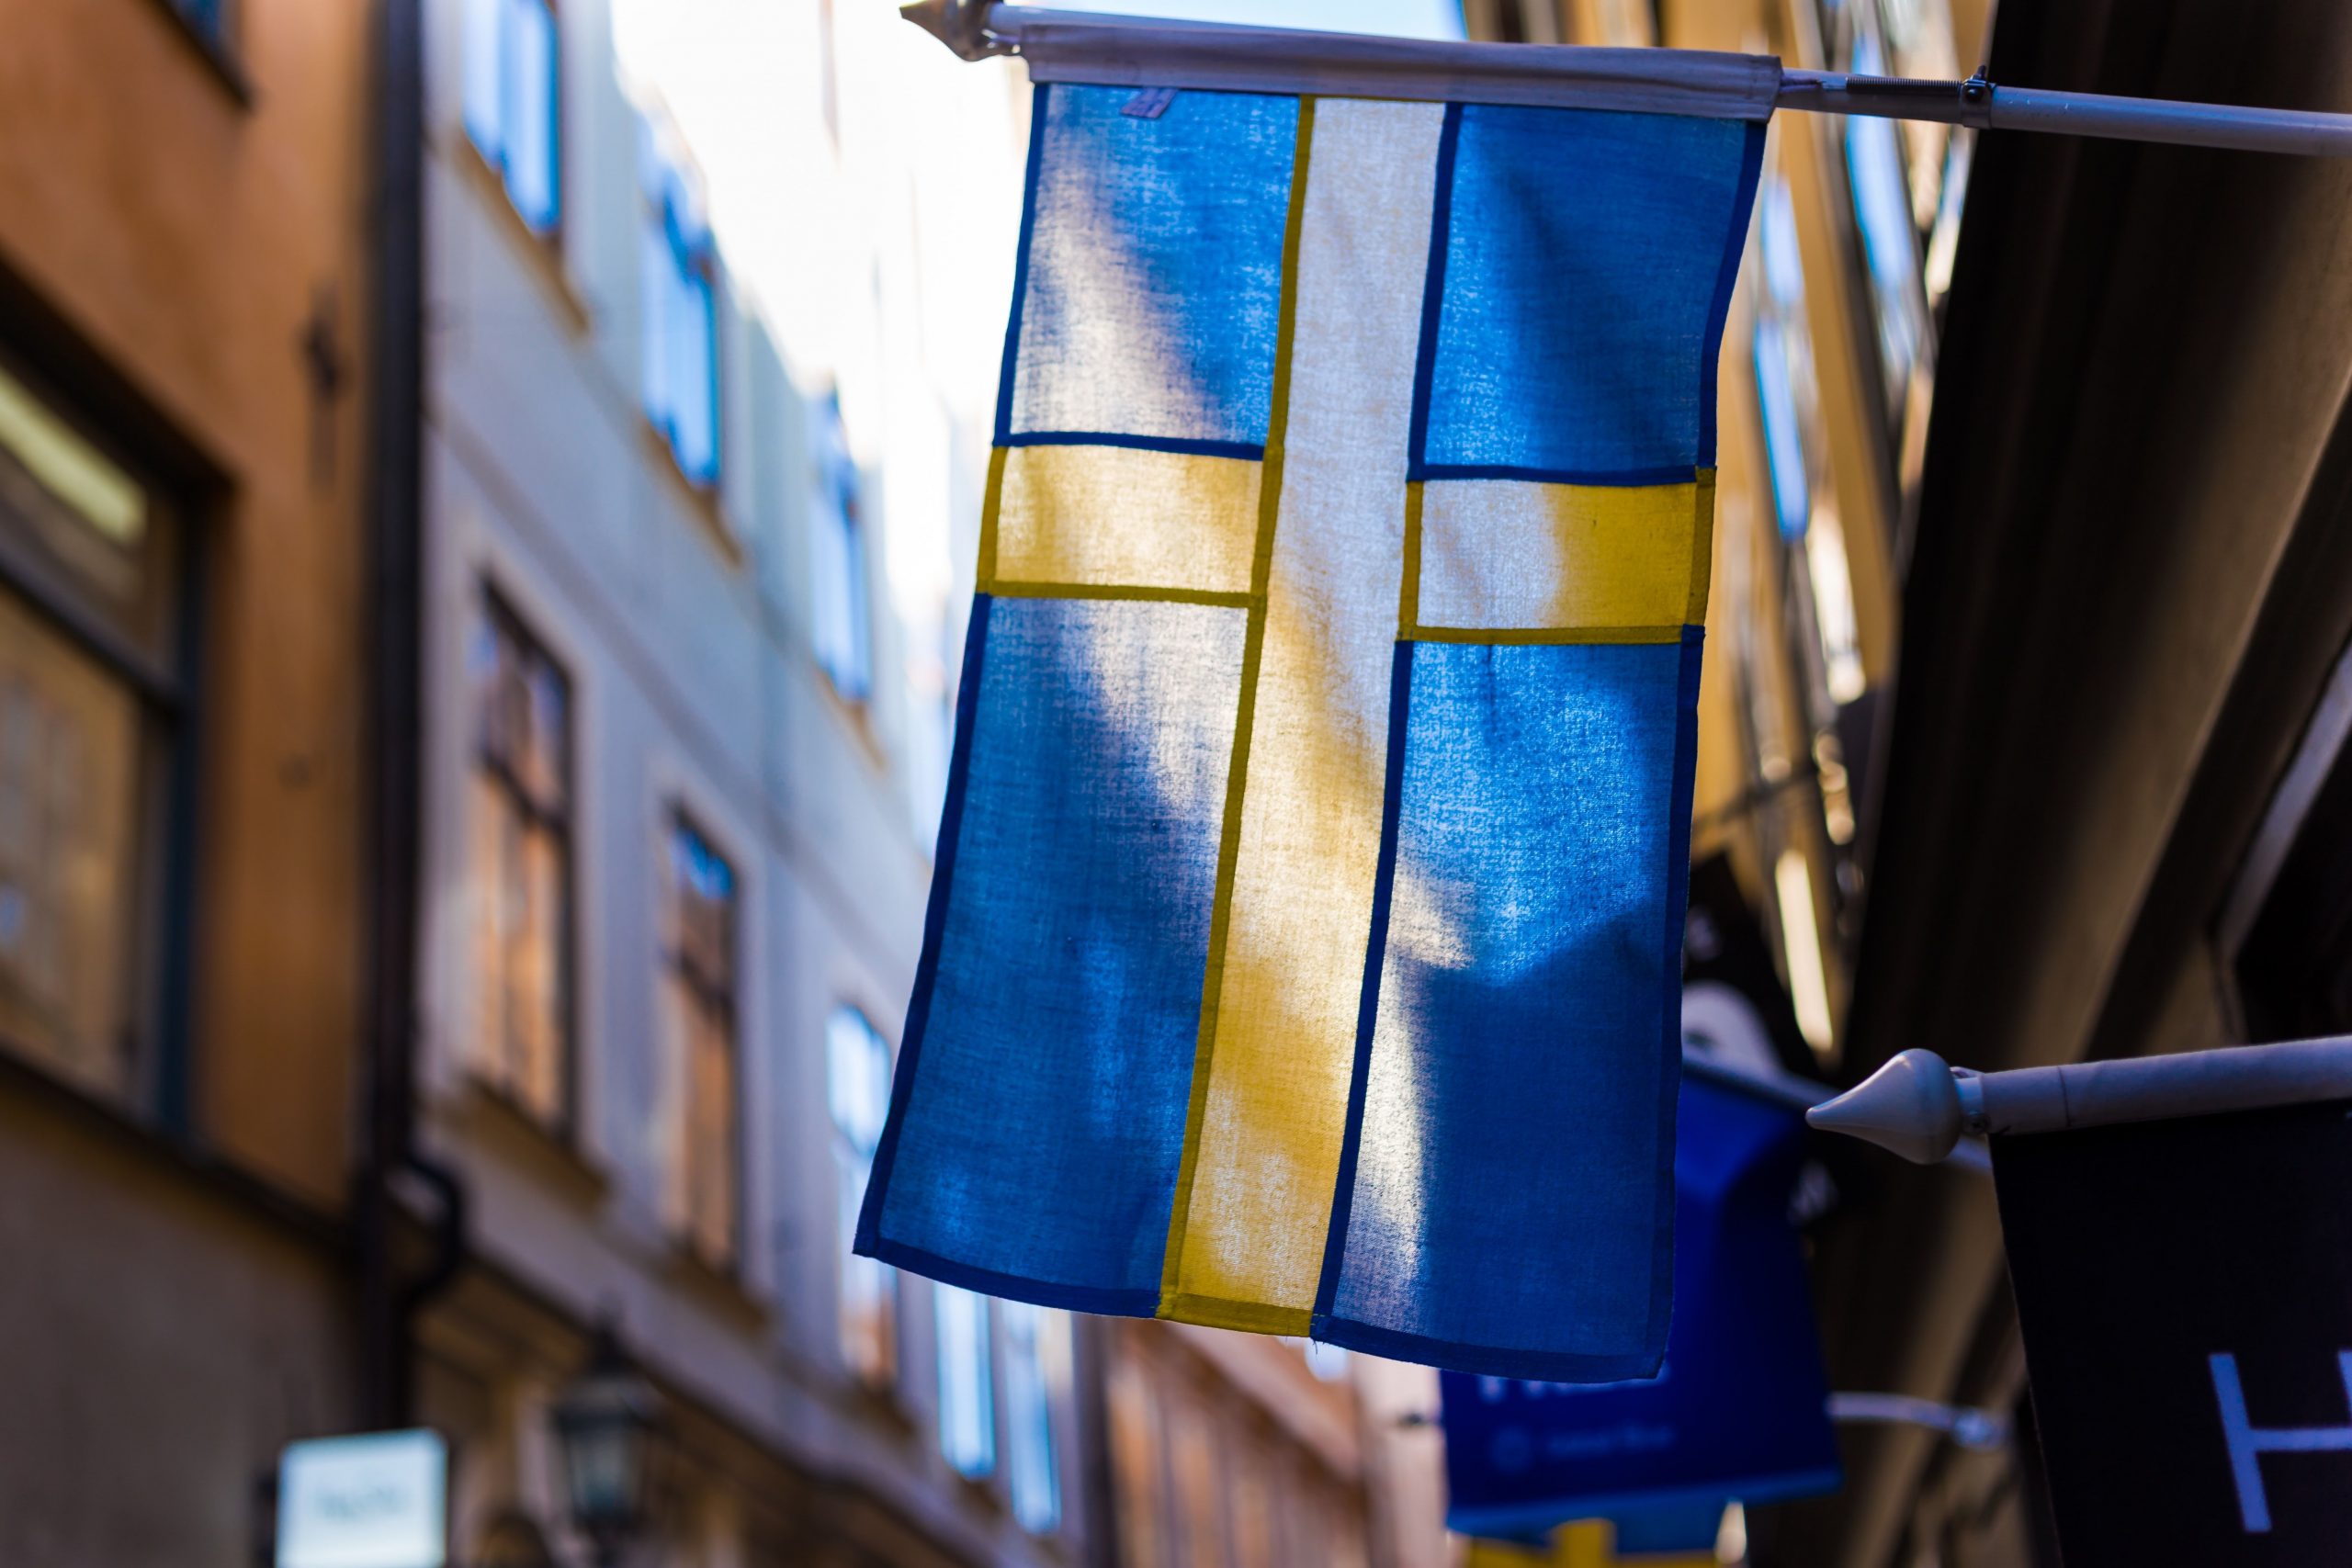 Sweden, a flawed climate awareness pioneer